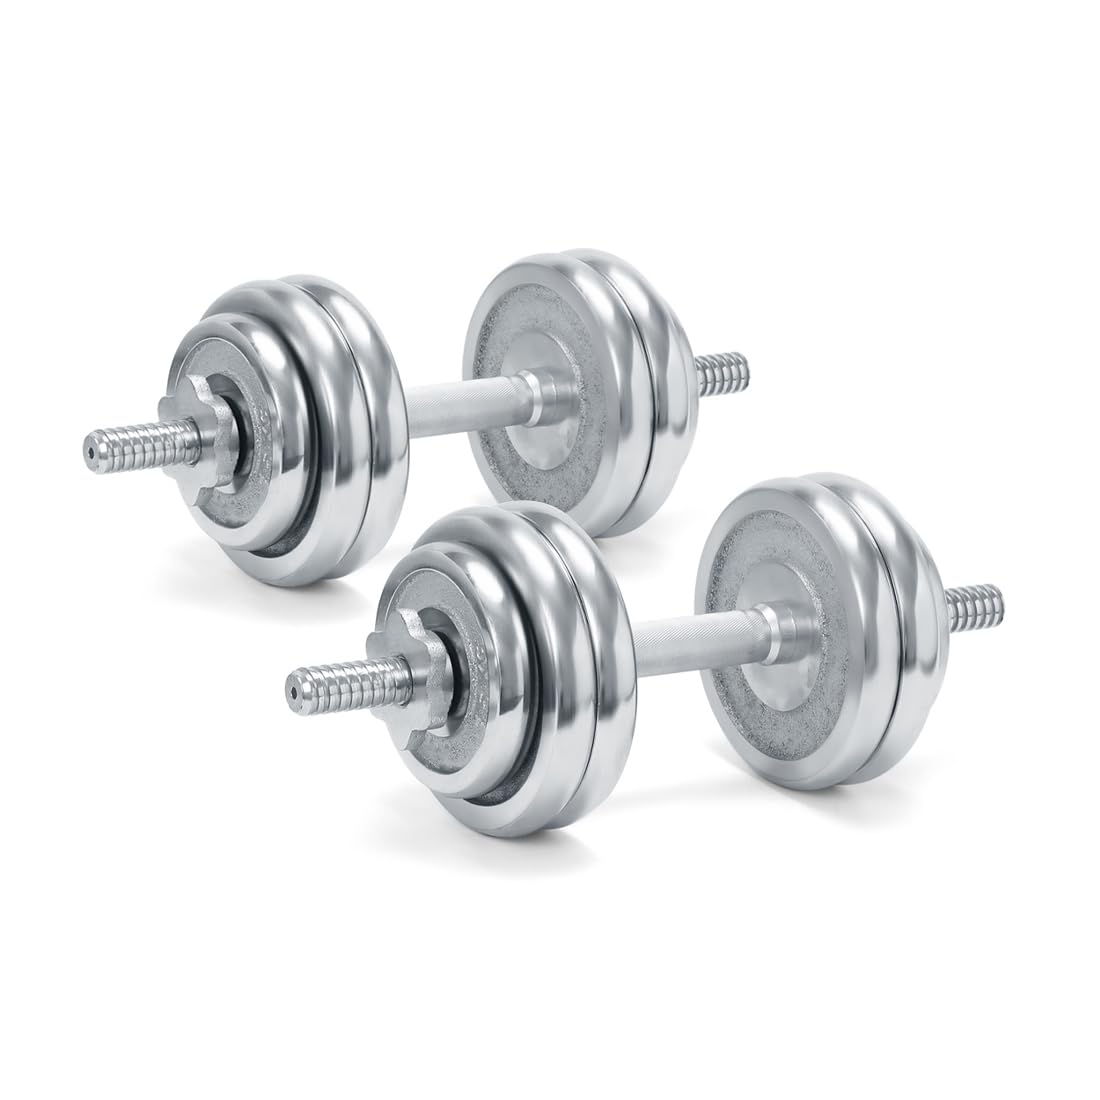 Cast Iron Chrome Plated Spinlock Adjustable Dumbbell For Home Gym, Bodybuilding Fitness and Core Fitness